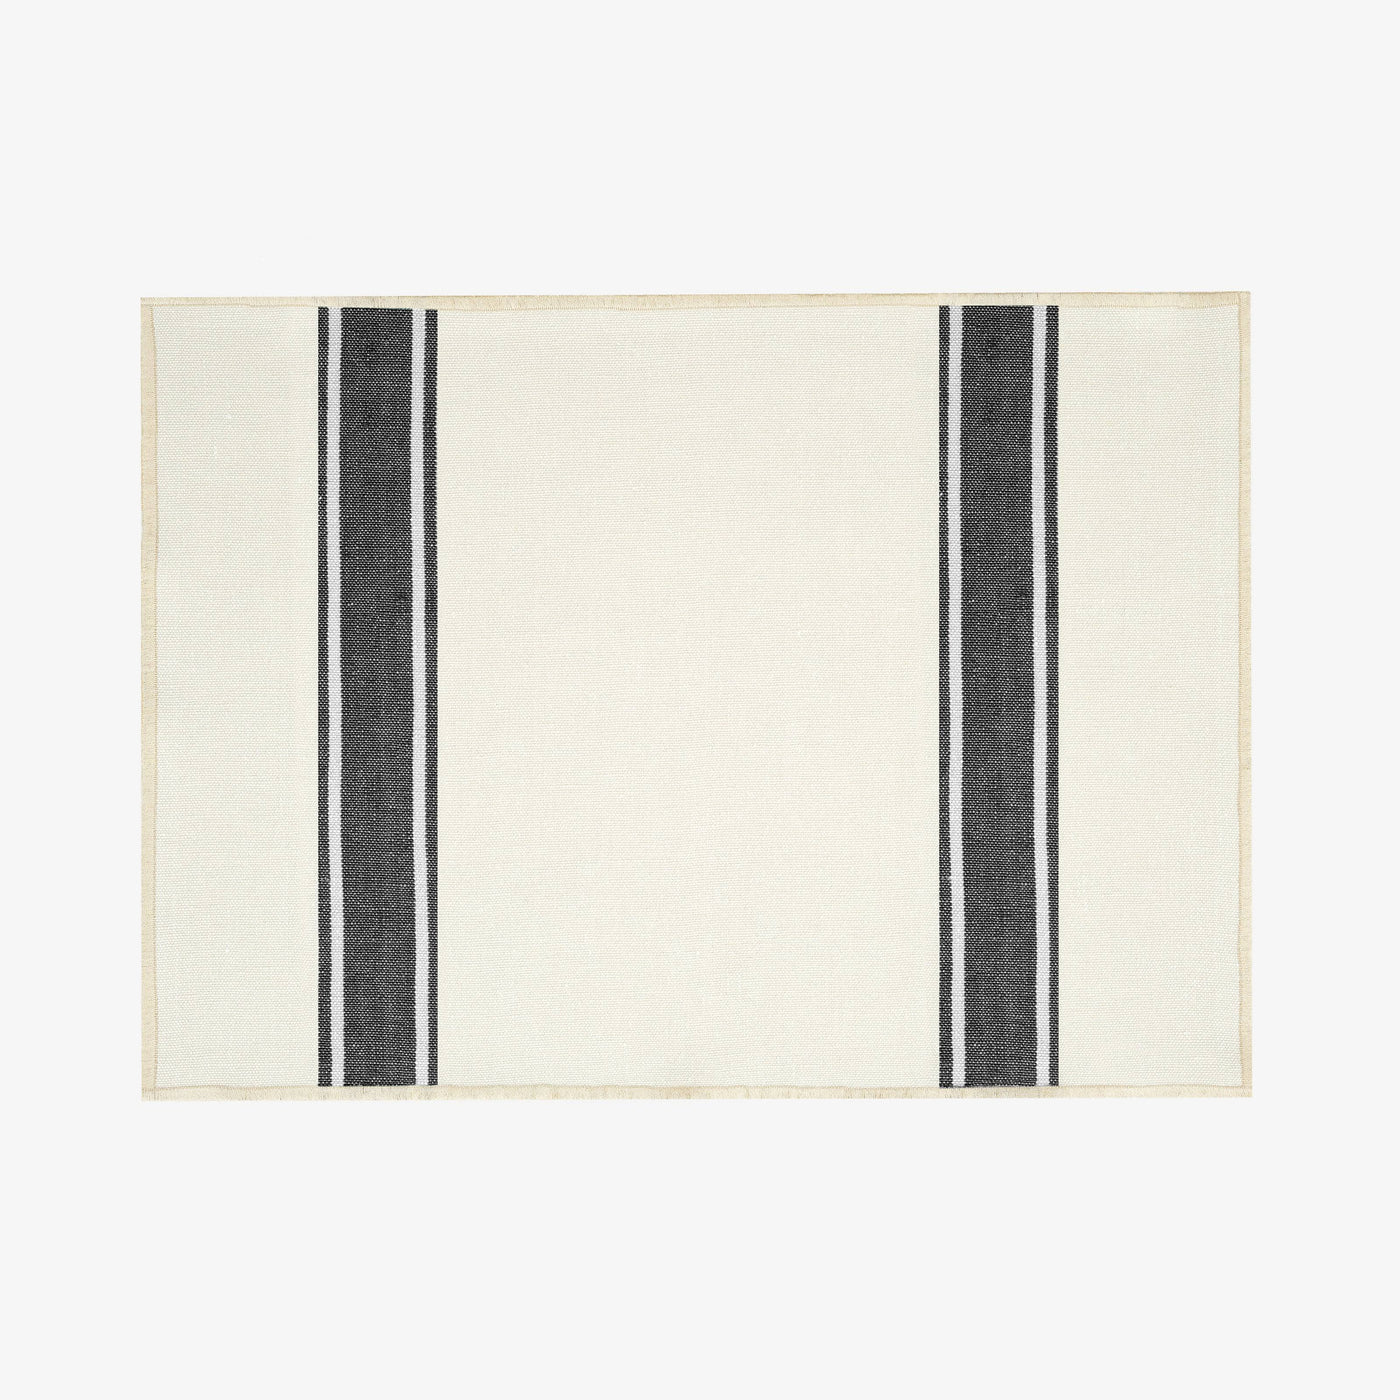 Mary Set of 2 Striped Placemats, Natural - Black, 35x46 cm 1